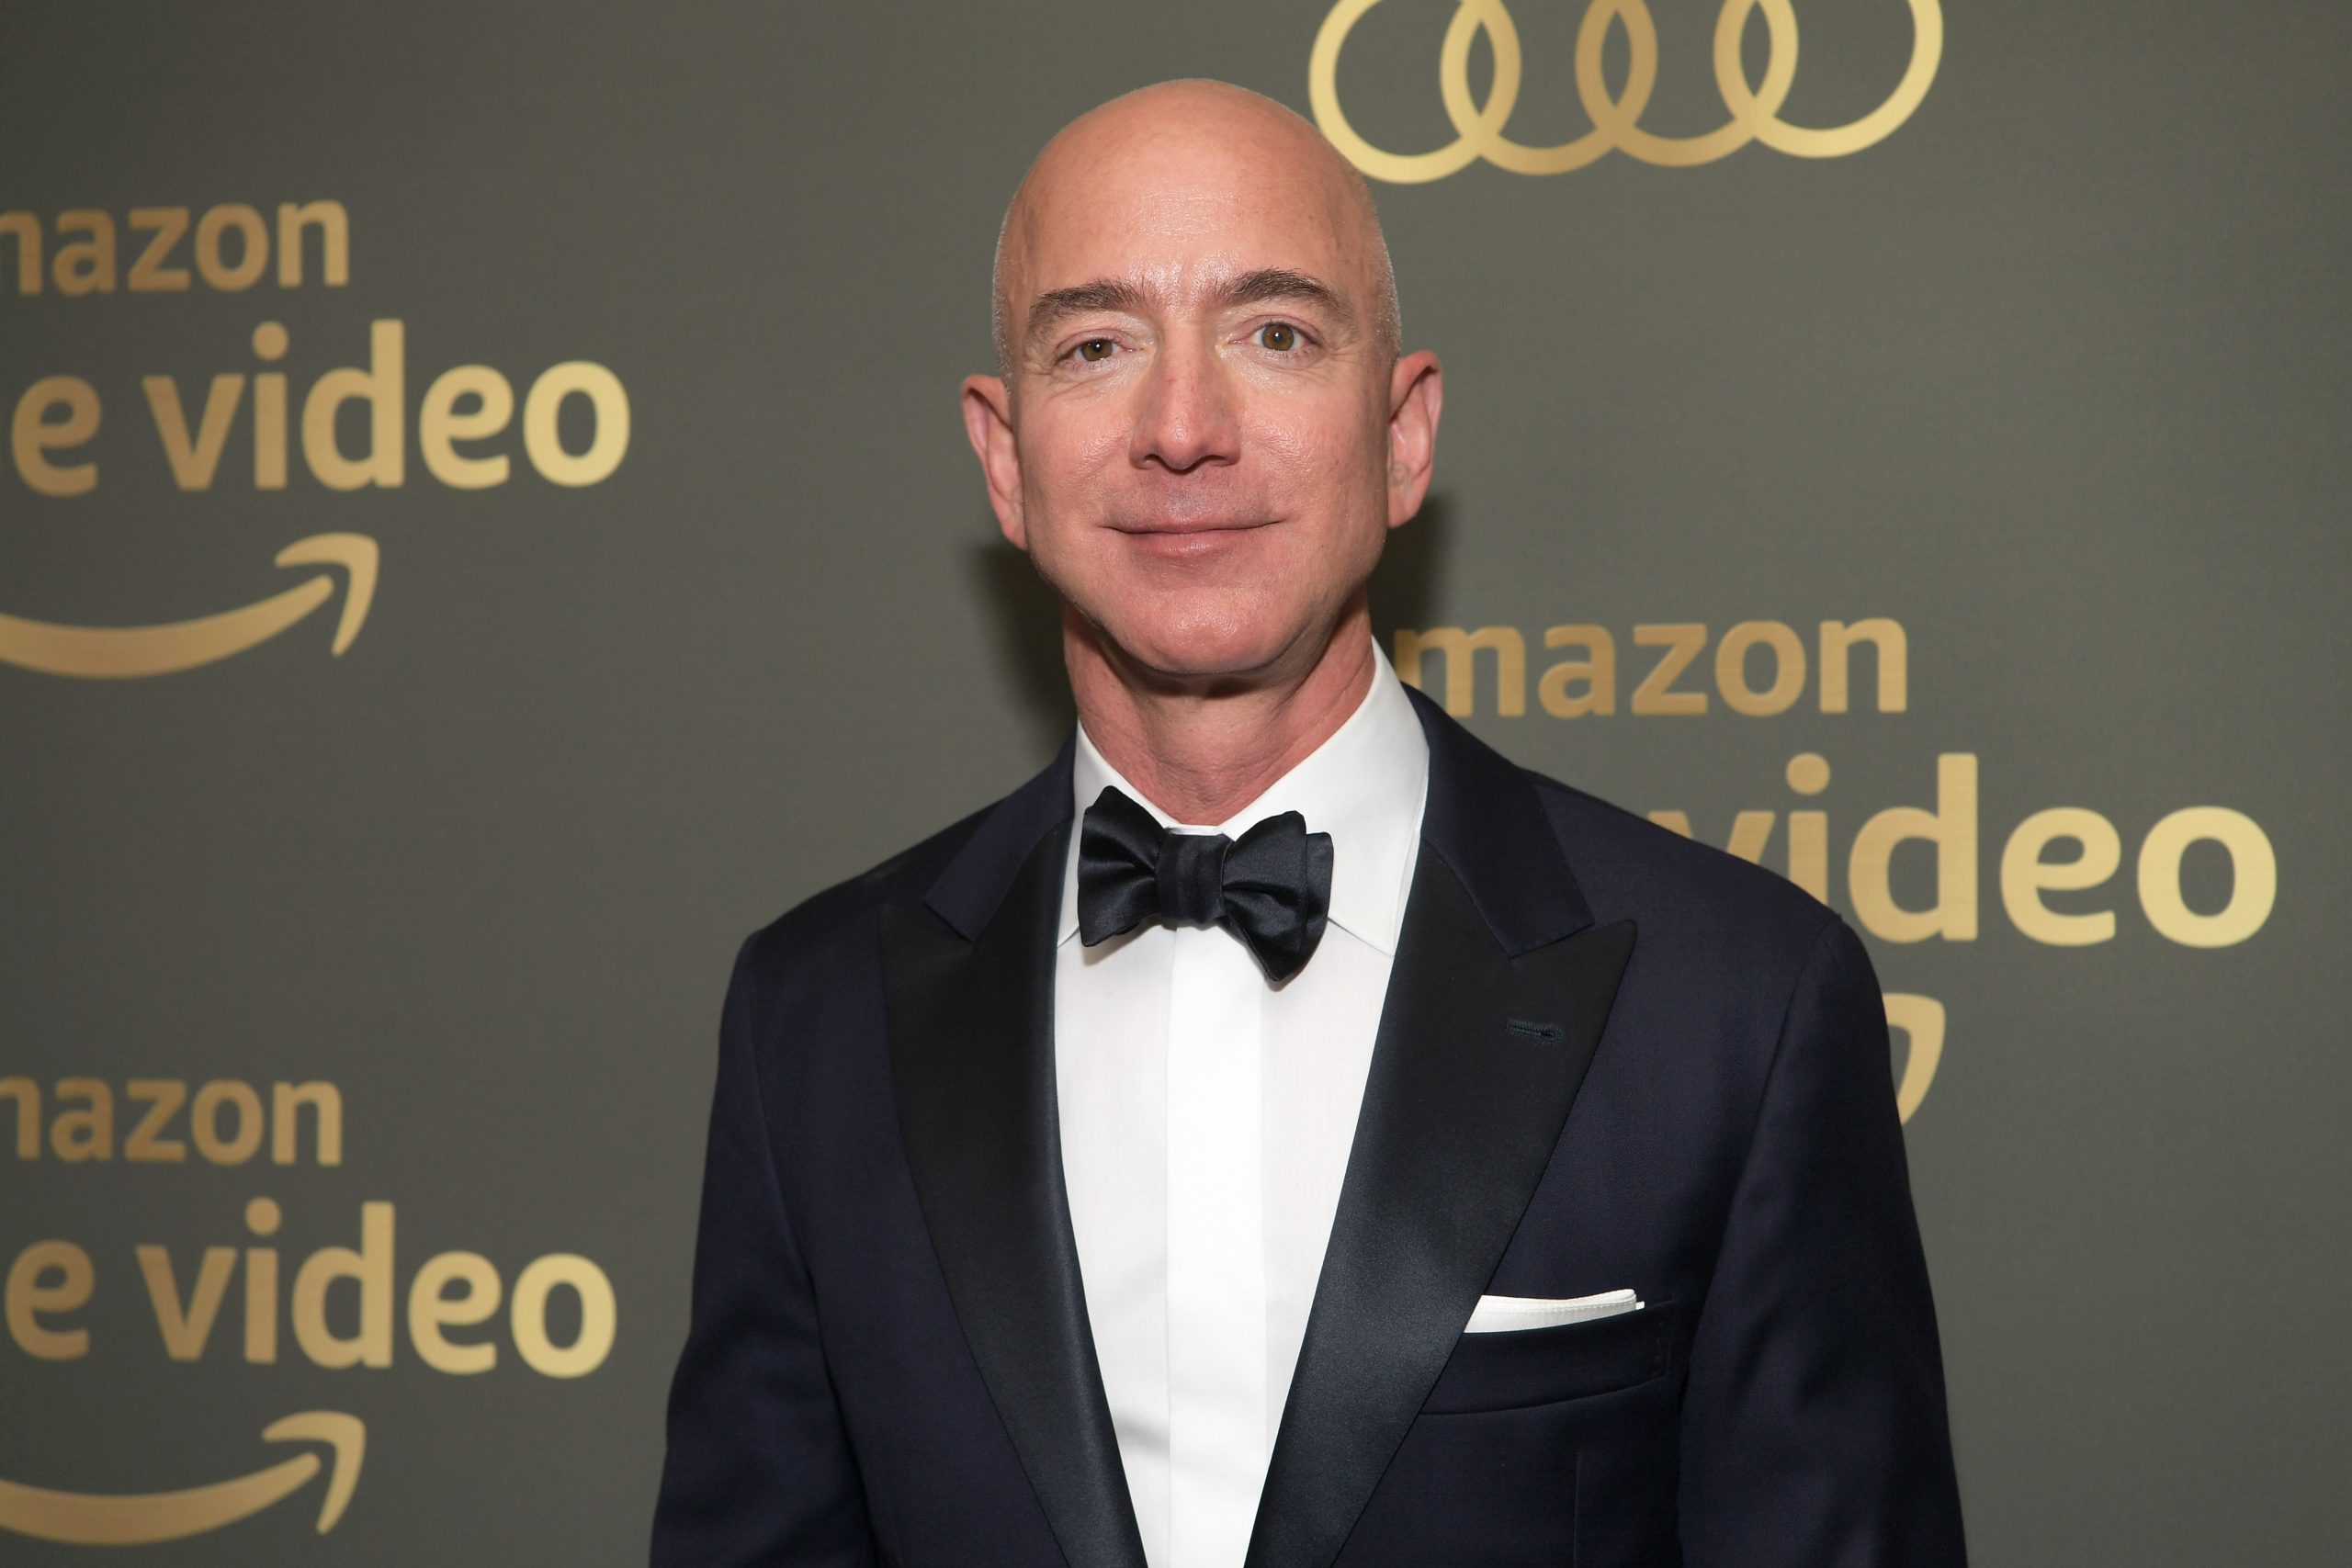 Amazon Founder Jeff Bezos Resigns As CEO, Critics Claim The Move Is To Clean Up His Soiled Name